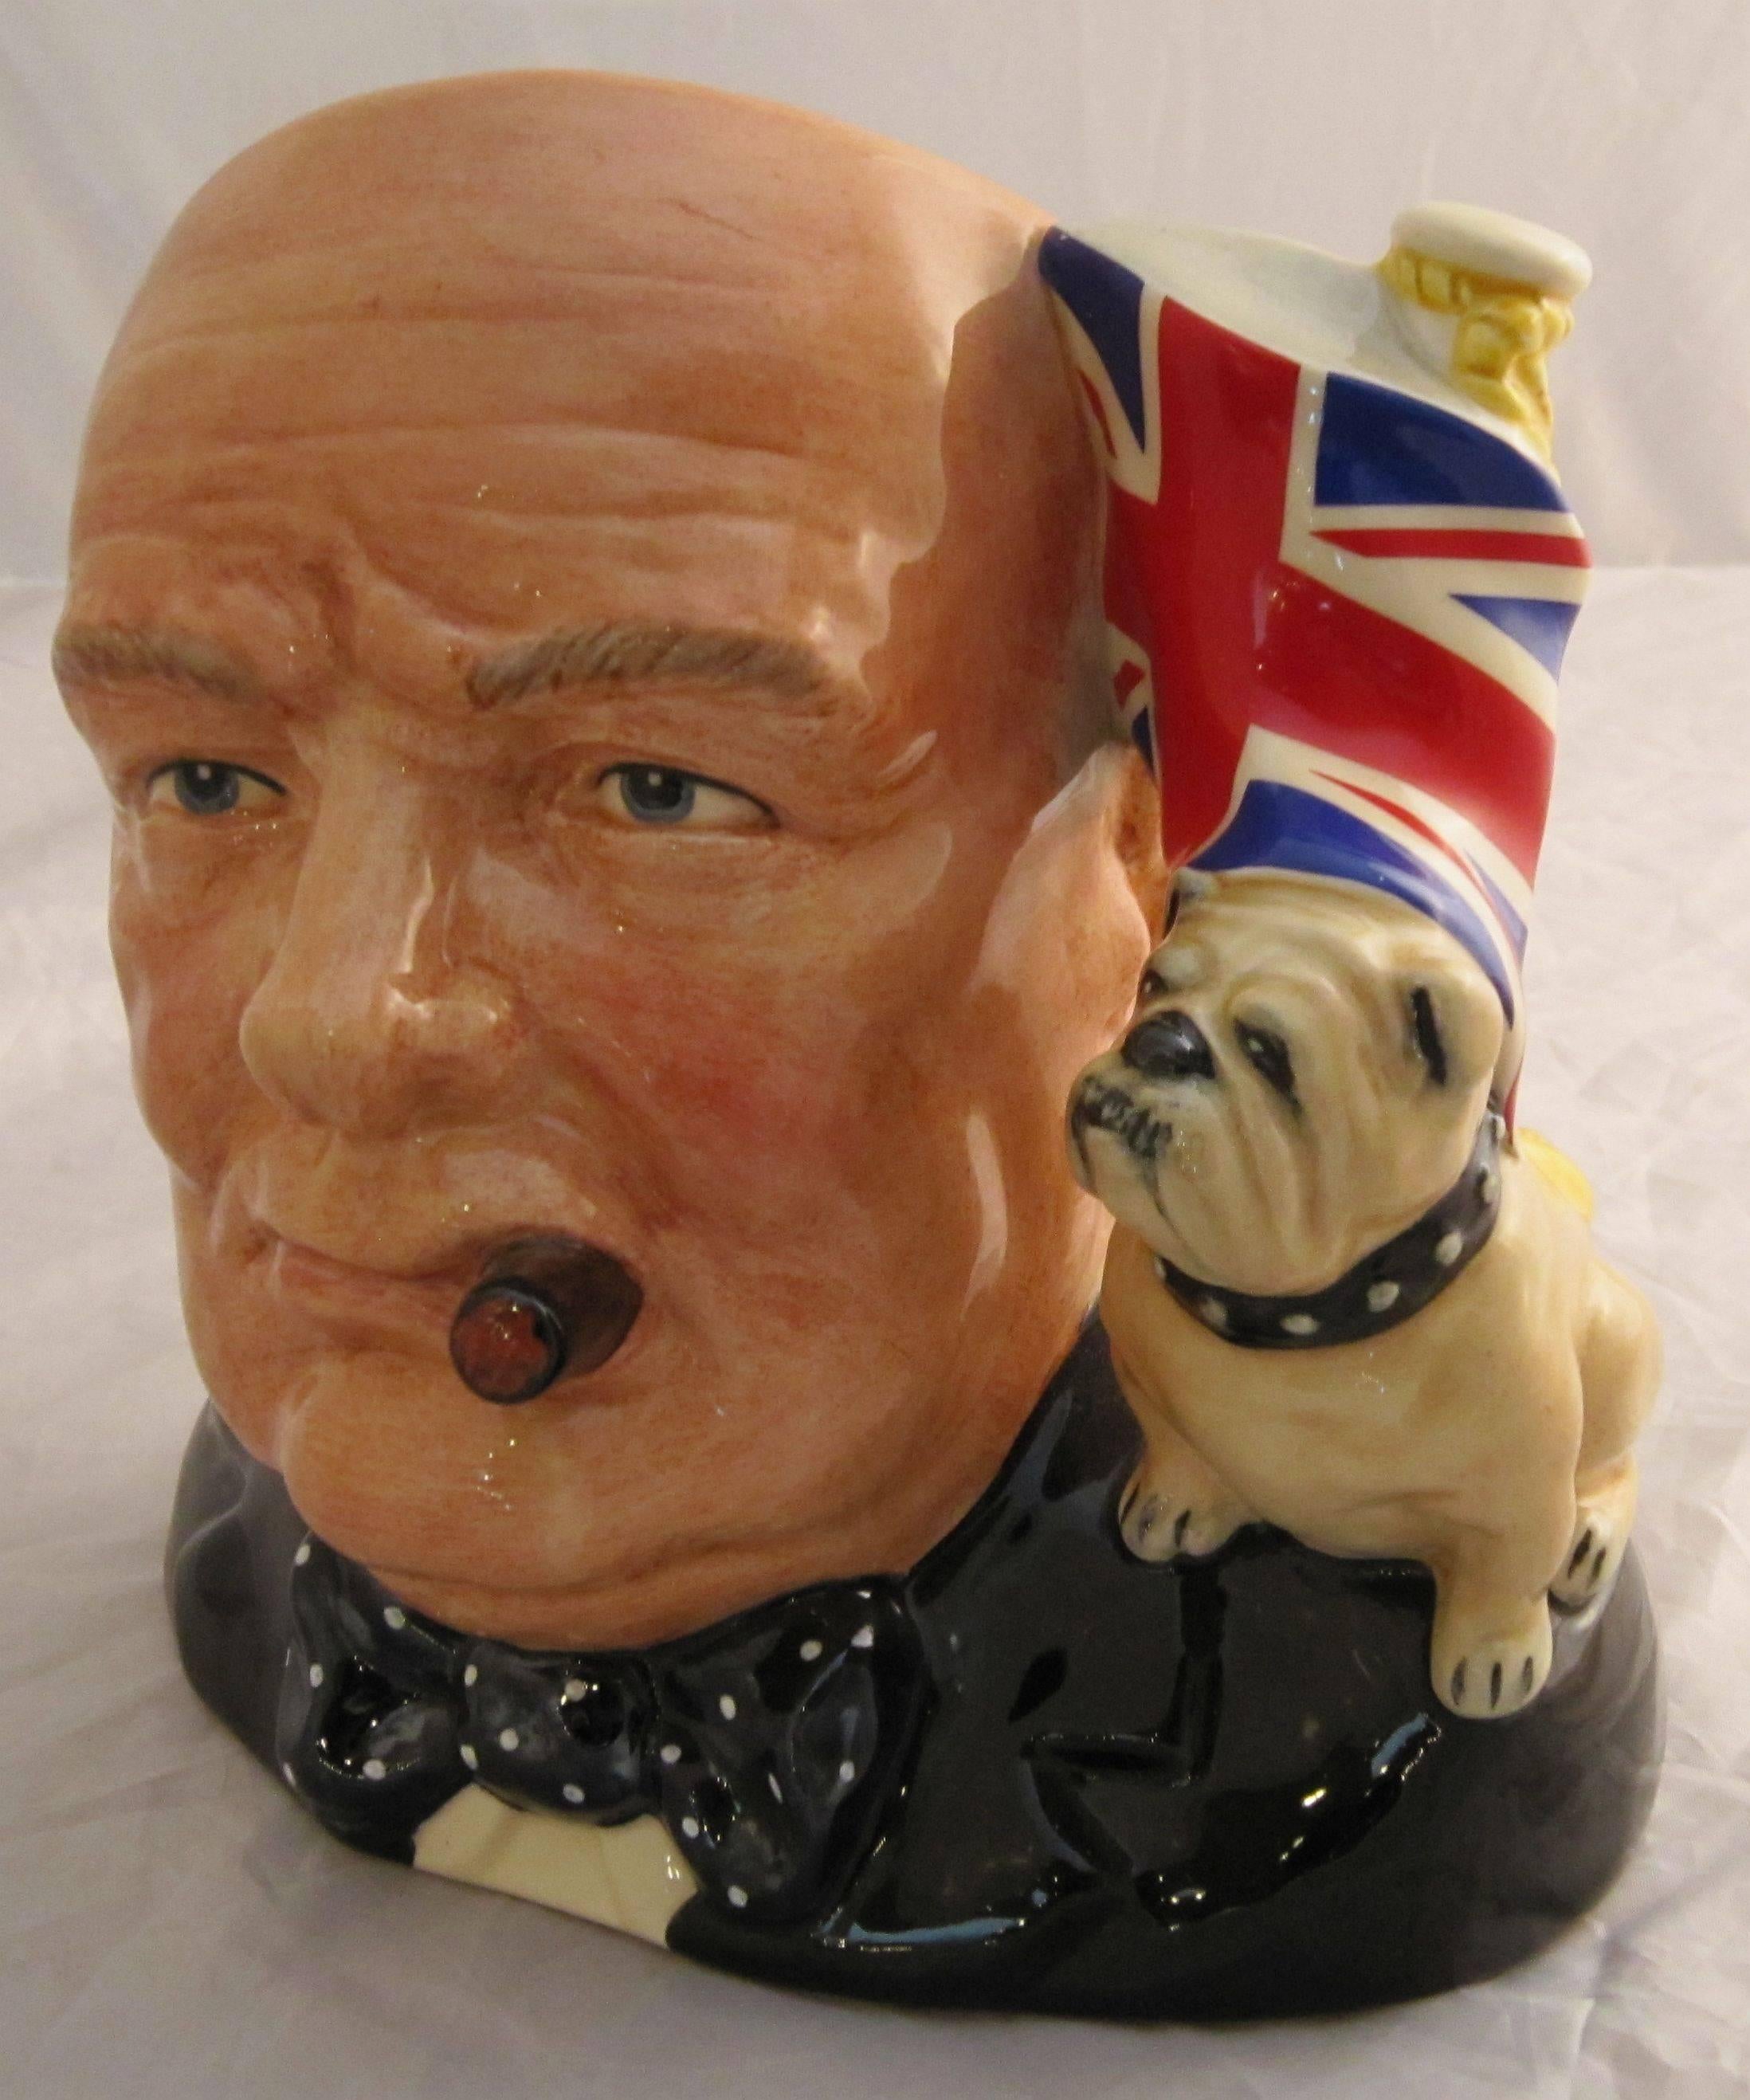 A handsome Winston Churchill character jug or decorative mug by the English pottery firm, Royal Doulton.

Ask about our other Winston Churchill items.